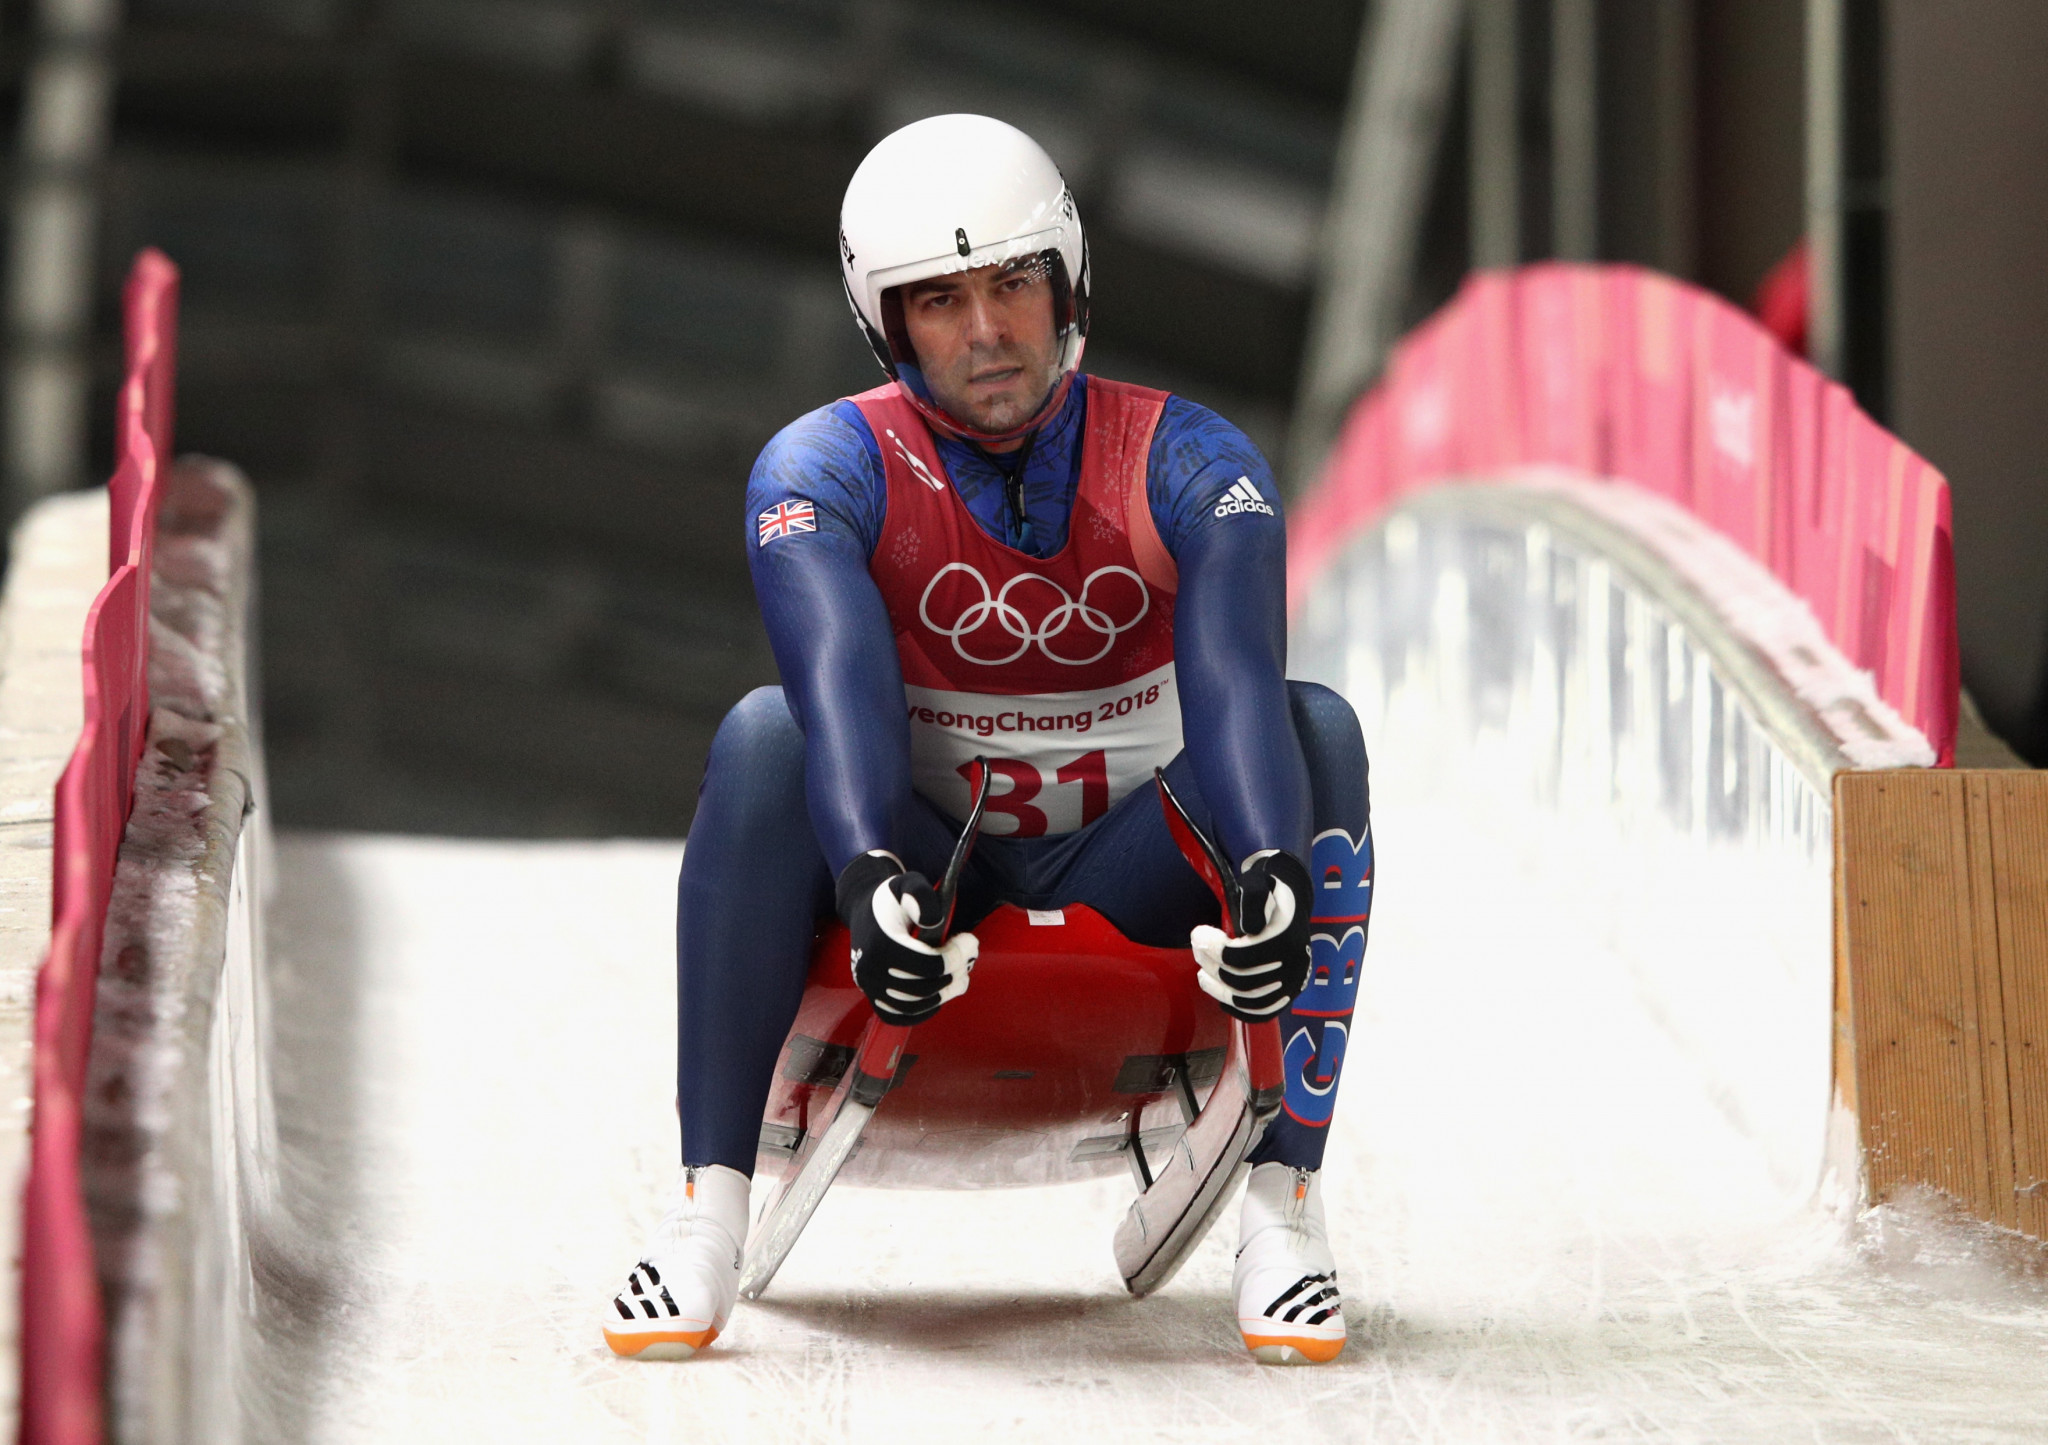 Tributes flood in for "Britain's greatest luge athlete" Rosen